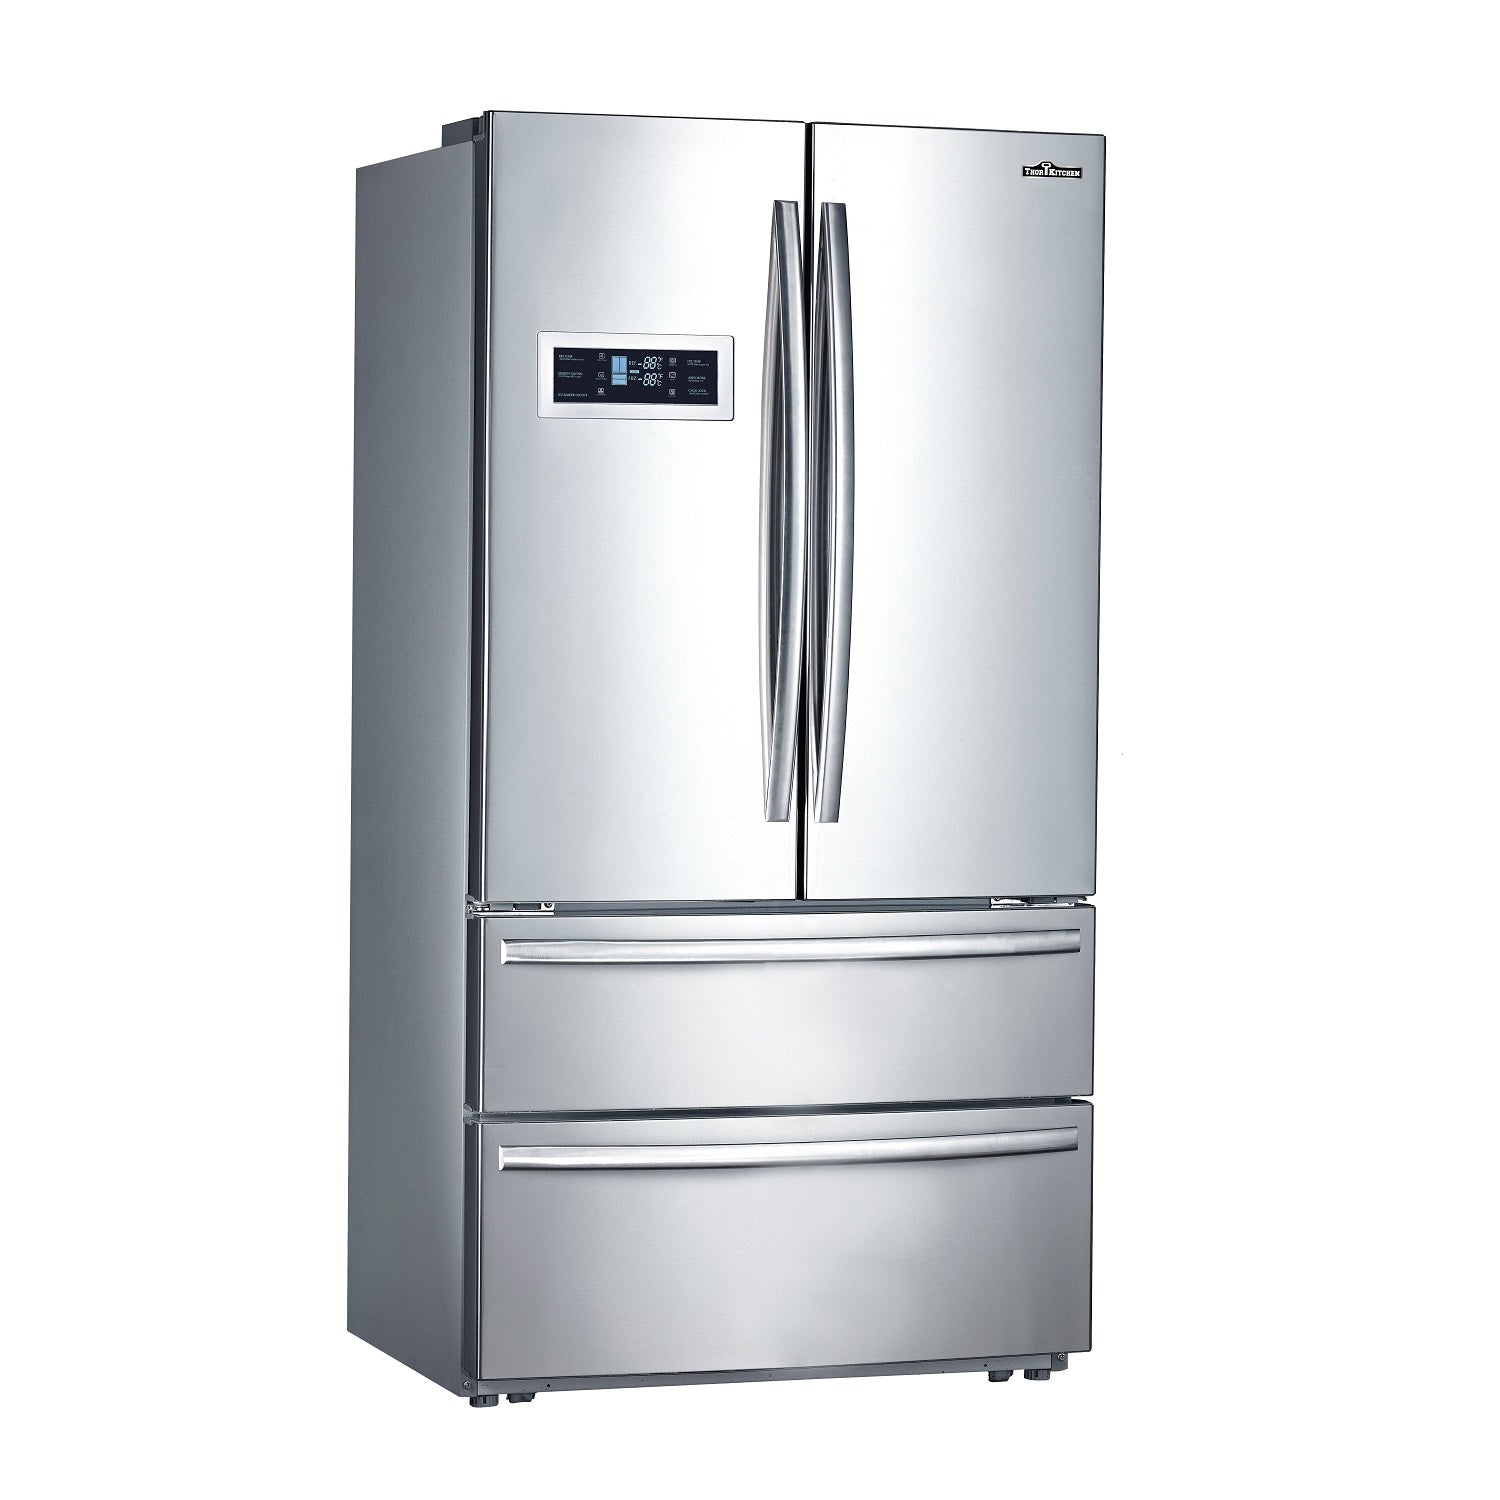 36" Counter Depth French door Stainless Steel Refrigerator HRF3601F - Open Box (Like New) - RenoShop